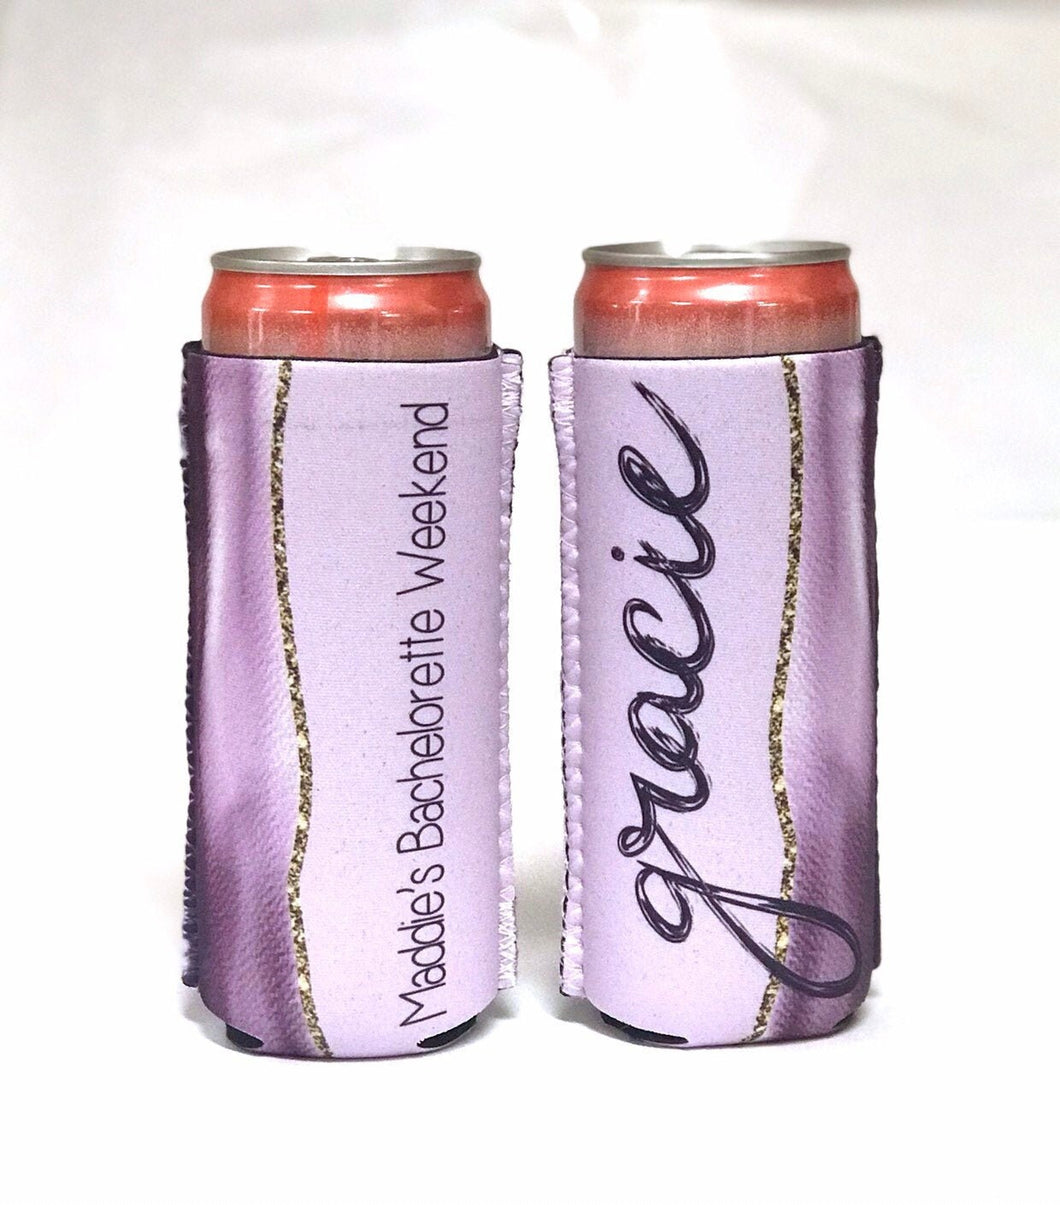 Slim party huggers. Skinny can party favors. Personalized Birthday or Bachelorette Party Favors. Slim Can purples bachelorette party!